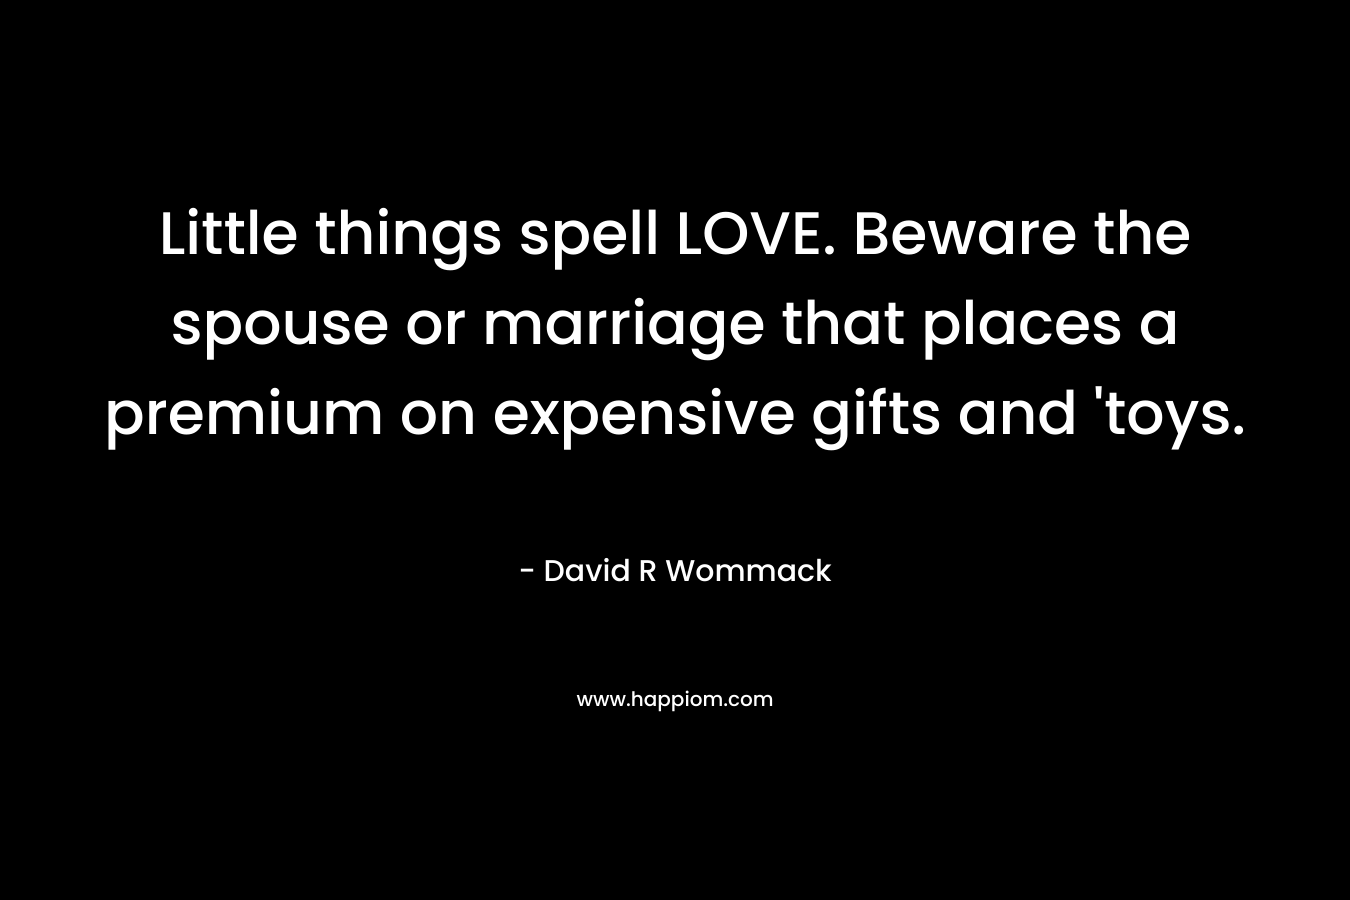 Little things spell LOVE. Beware the spouse or marriage that places a premium on expensive gifts and ‘toys. – David R Wommack